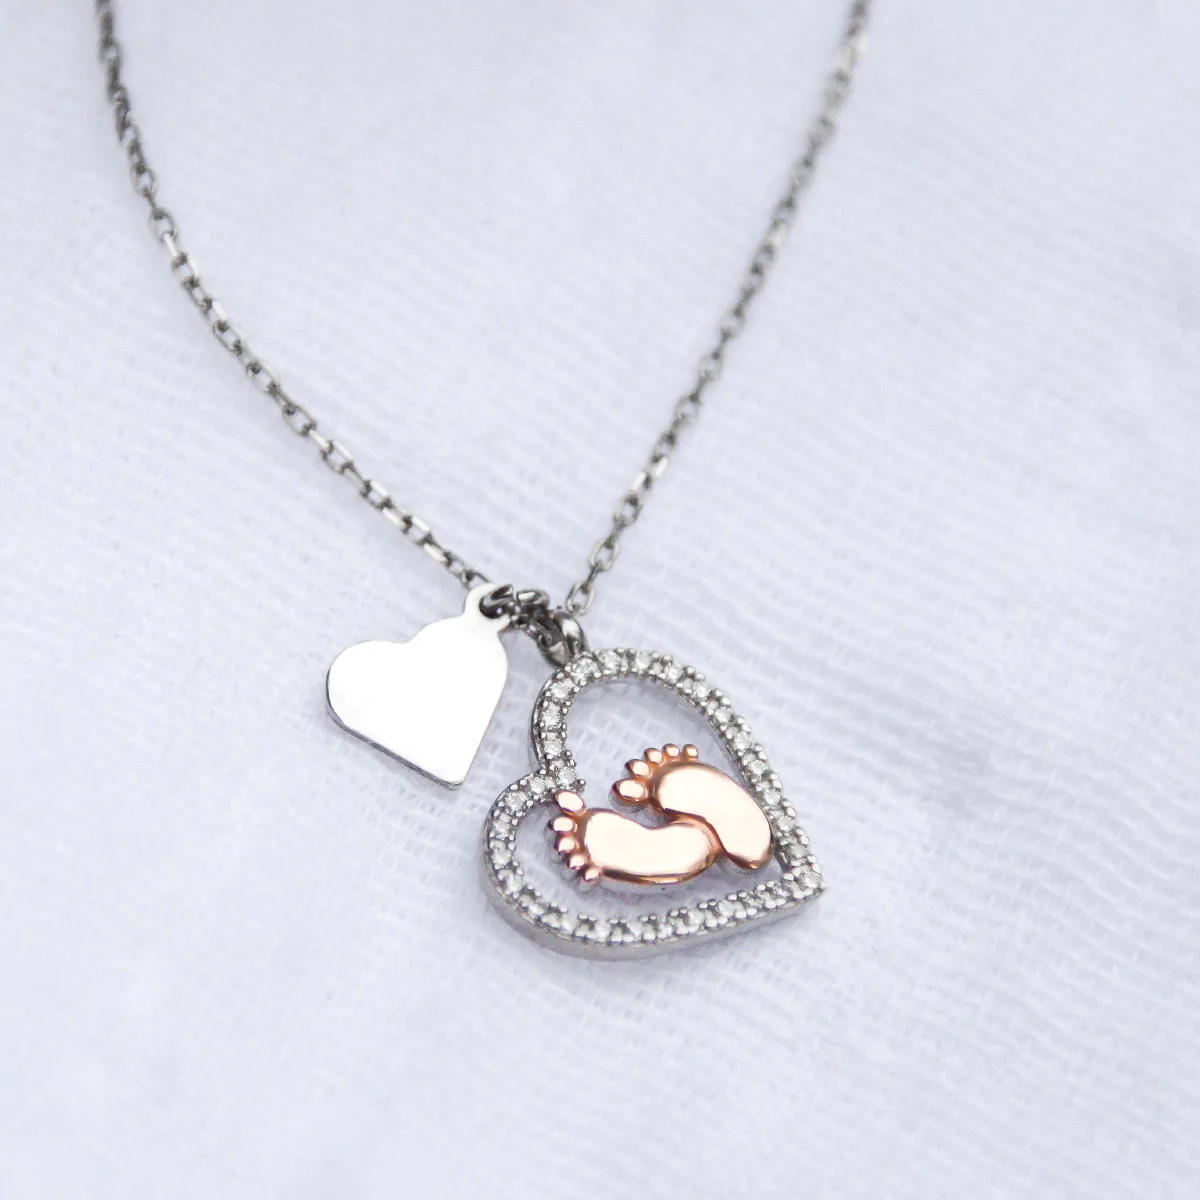 Best Heart Gift For Mom To Be - Baby Feet Heart 925 Sterling Silver Pendant Gift Set